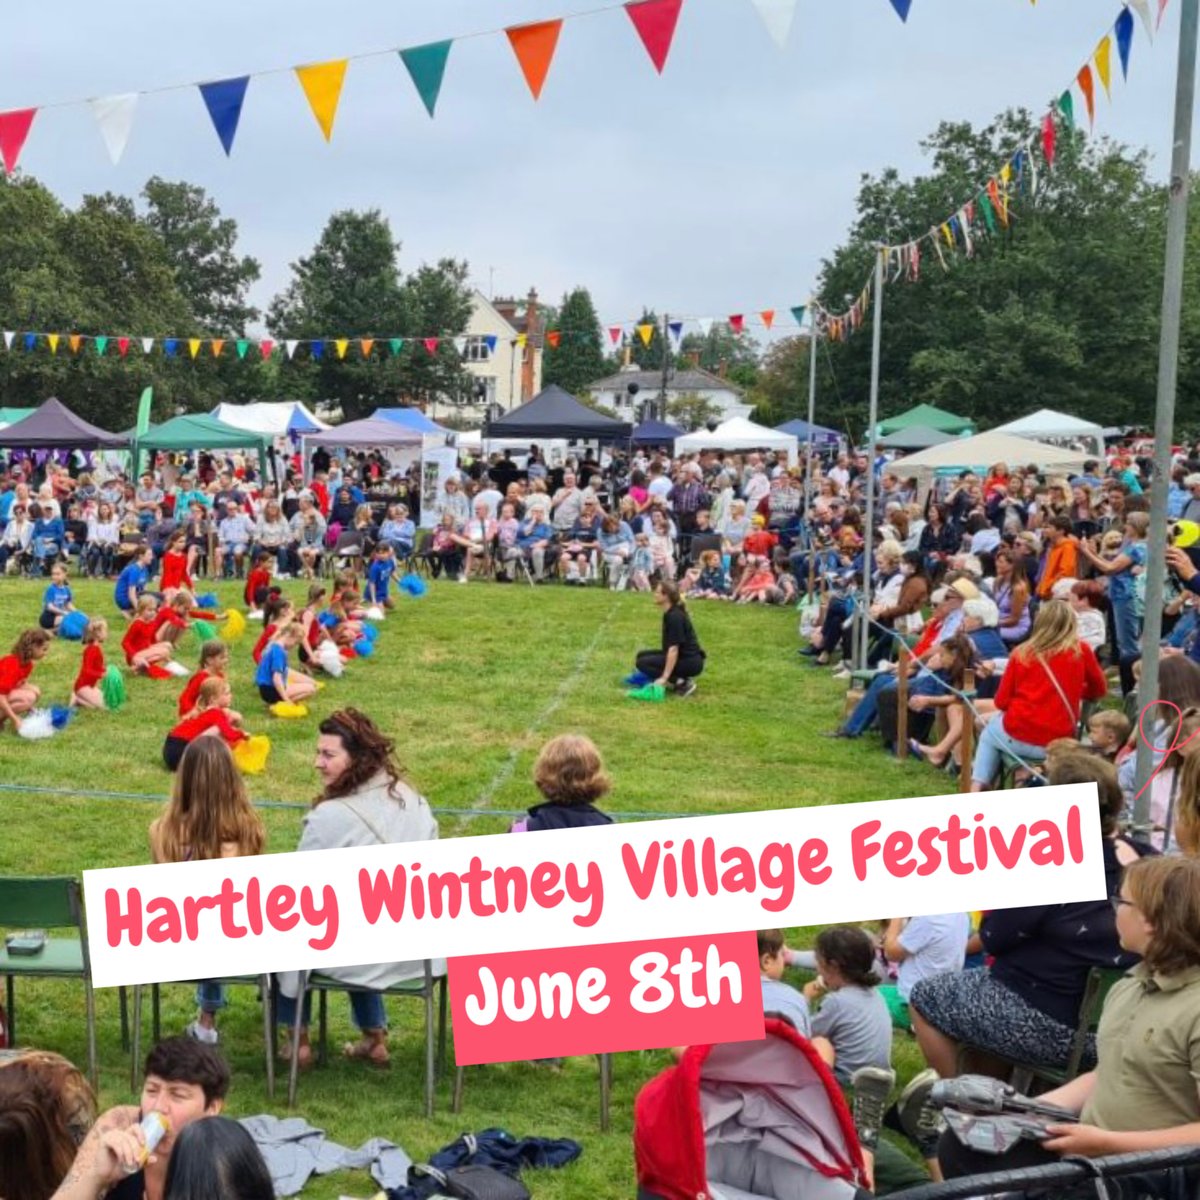 🎉 Get ready for a day of fun and community spirit at the Hartley Wintney Village Festival 2024! 🌟 Mark your calendar for June 8th and join us in supporting St Michael's Hospice while making unforgettable memories! rotary-ribi.org/clubs/page.php… #HartleyWintney #Festival #hampshire